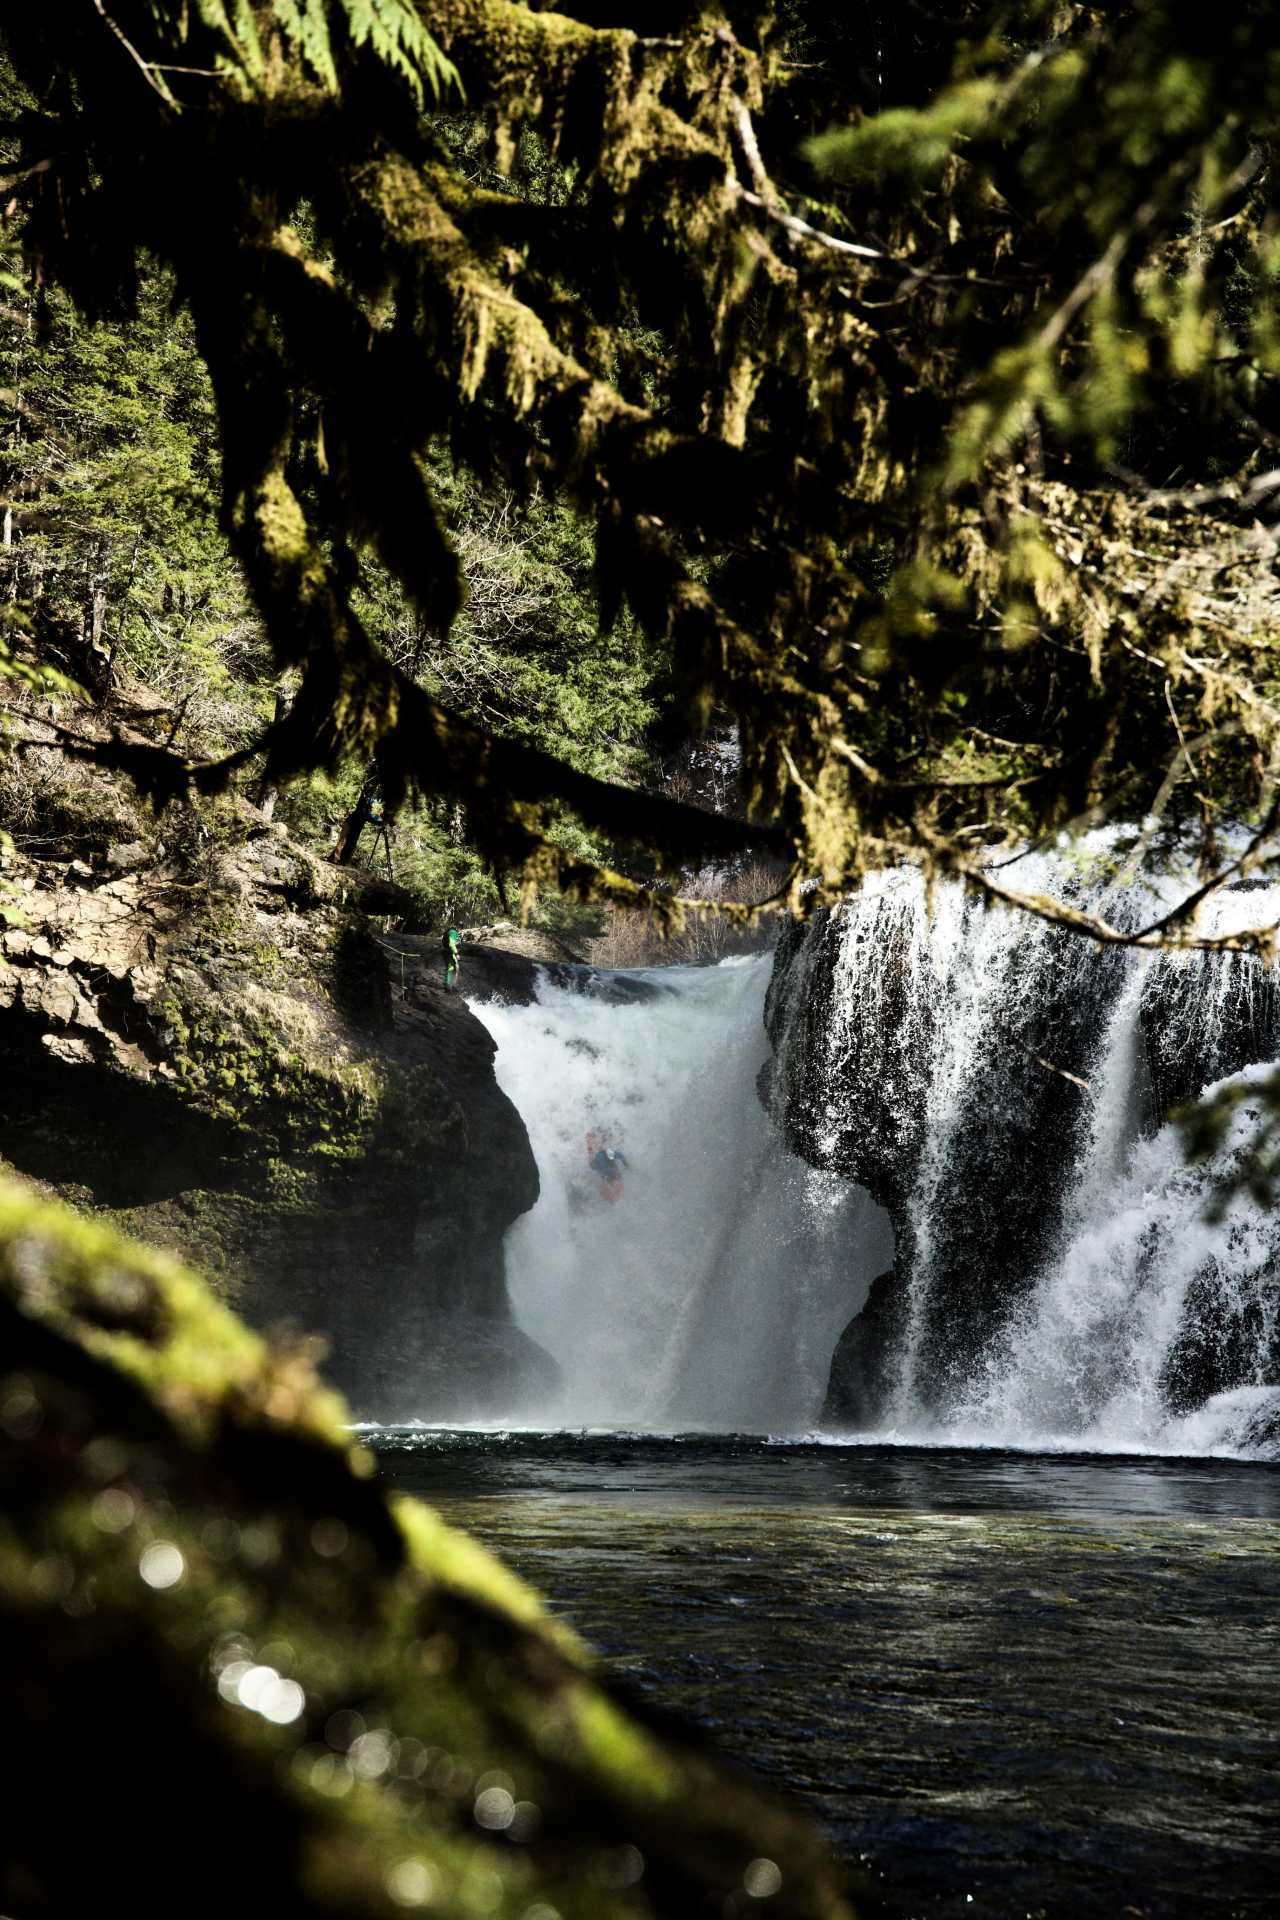 Will Lyons kayaks down a Waterfall in the Pacific Northwest